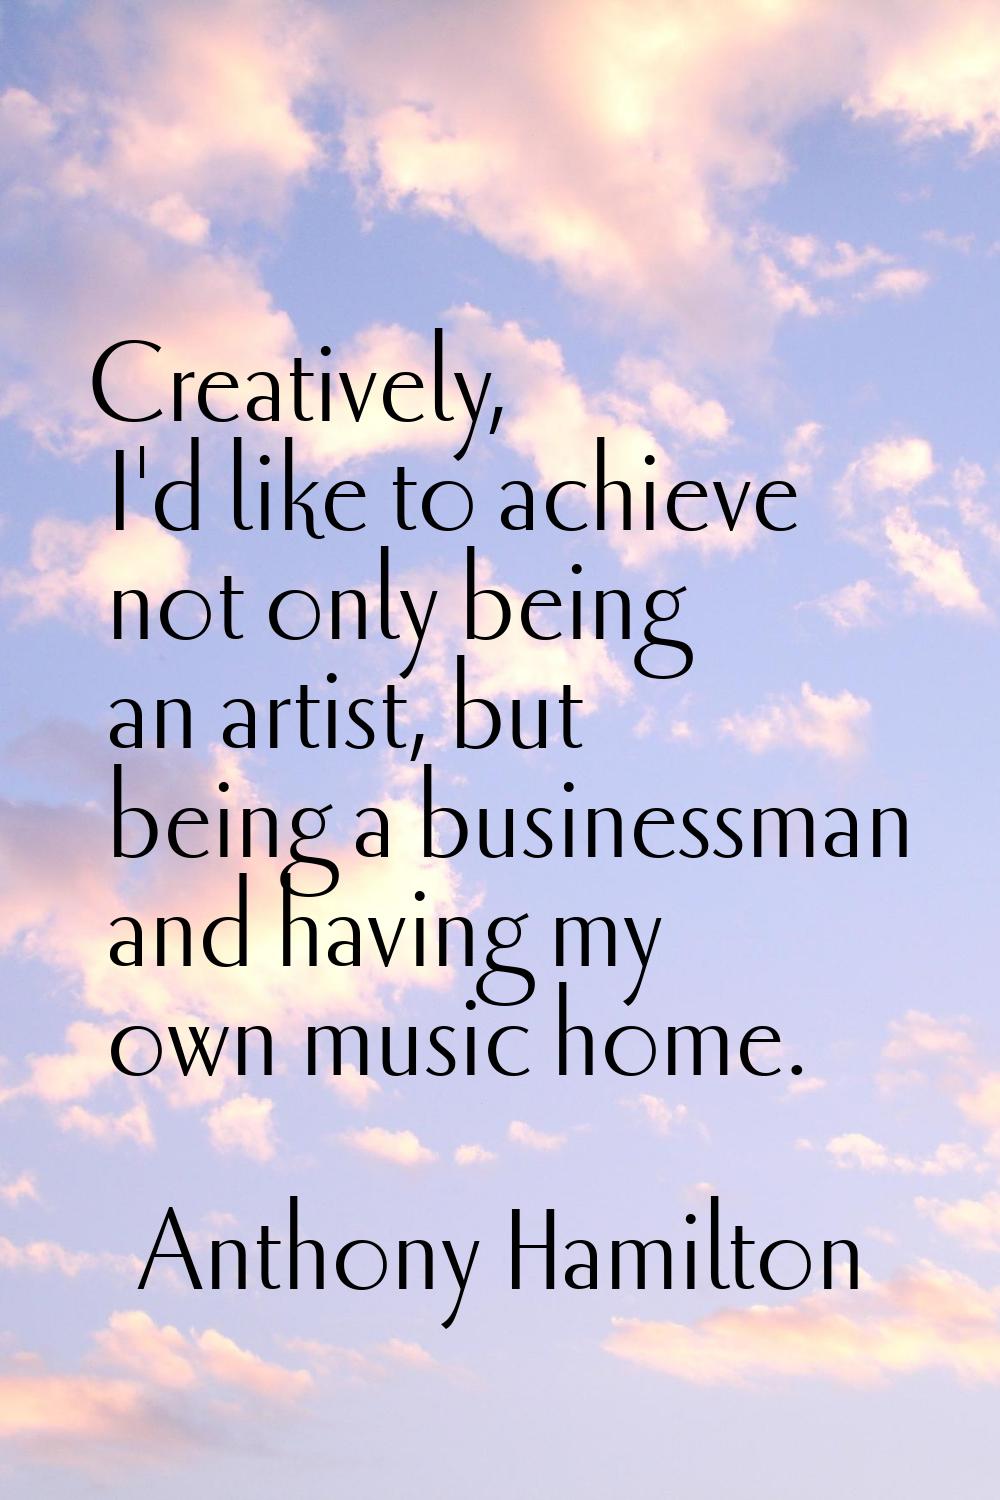 Creatively, I'd like to achieve not only being an artist, but being a businessman and having my own